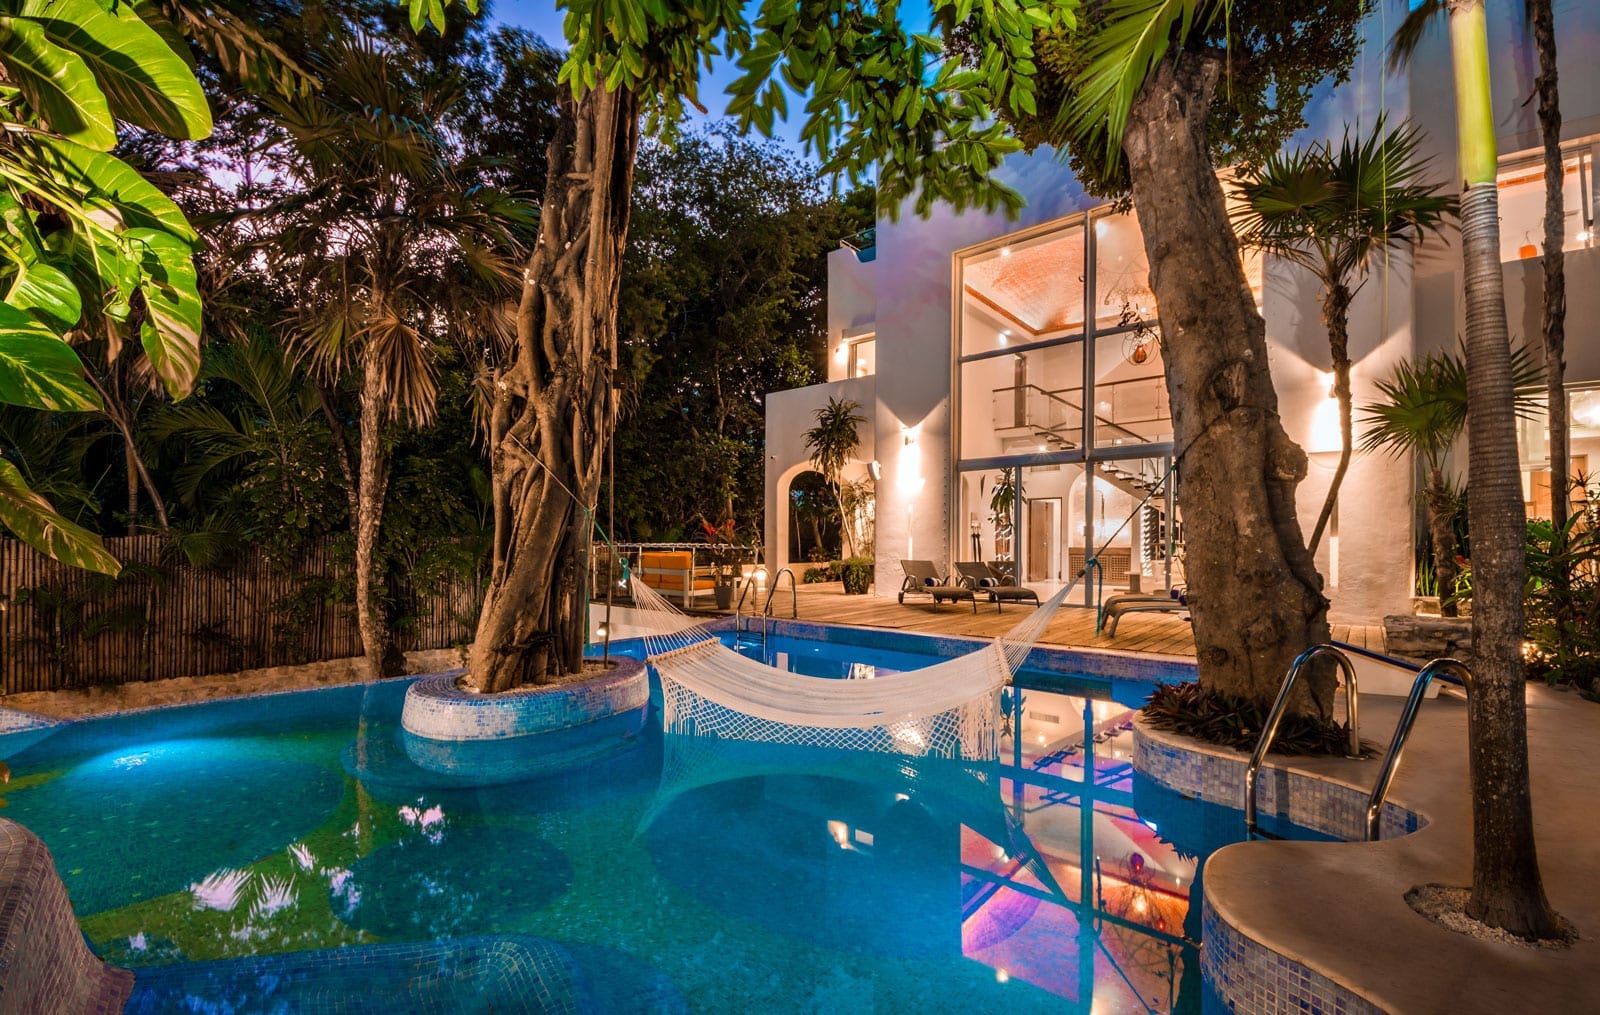 Casa Los Charcos, Playacar Phase 1: A luxurious retreat framed by verdant foliage, featuring an exquisite pool.